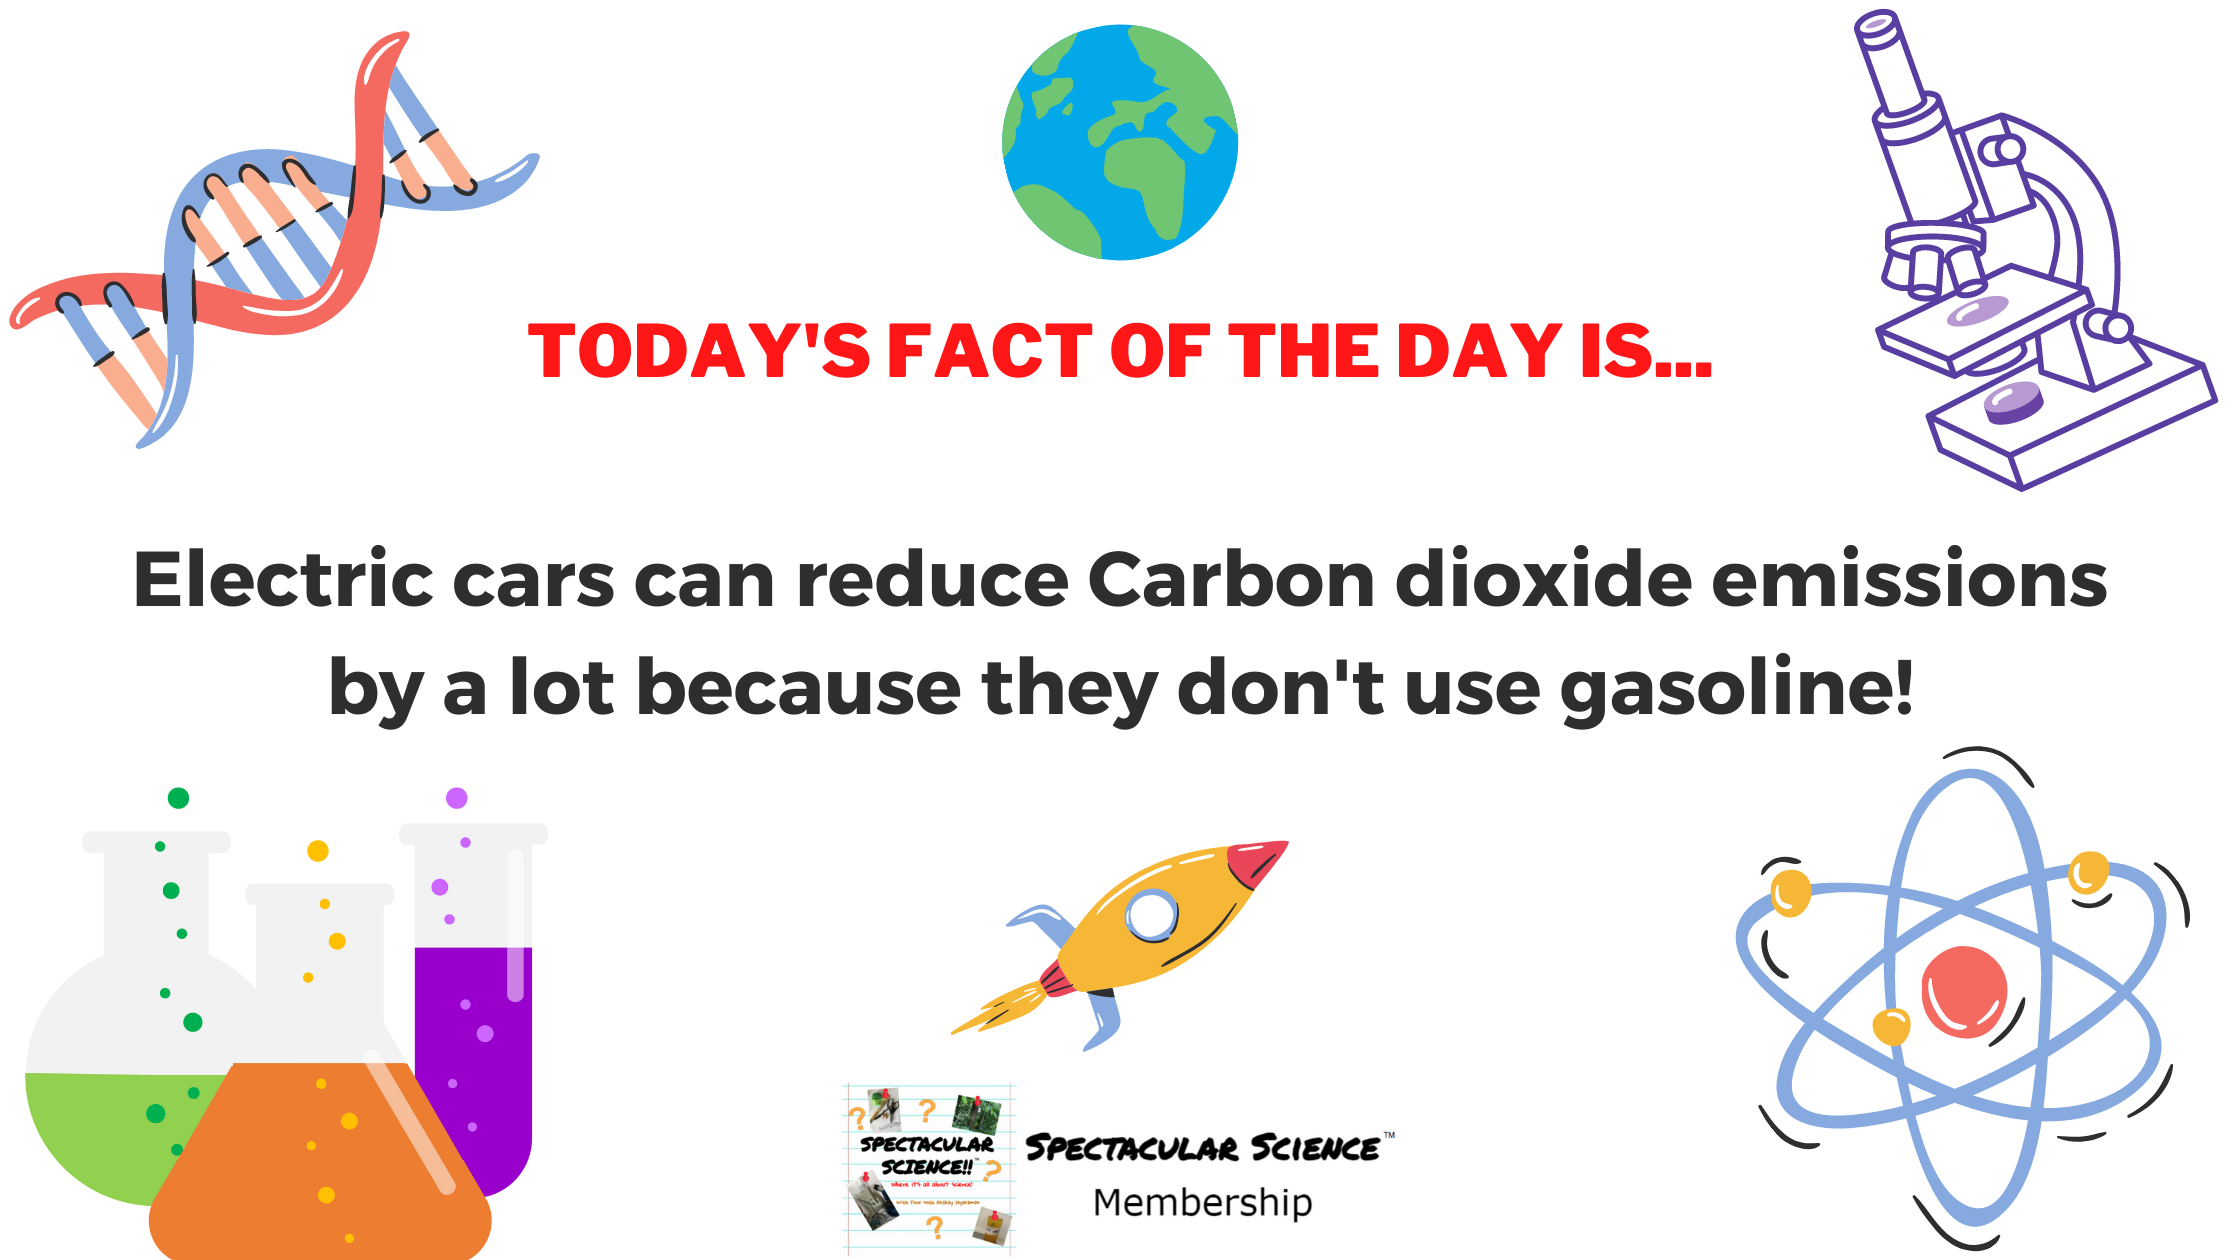 Fact of the Day Image May 29th